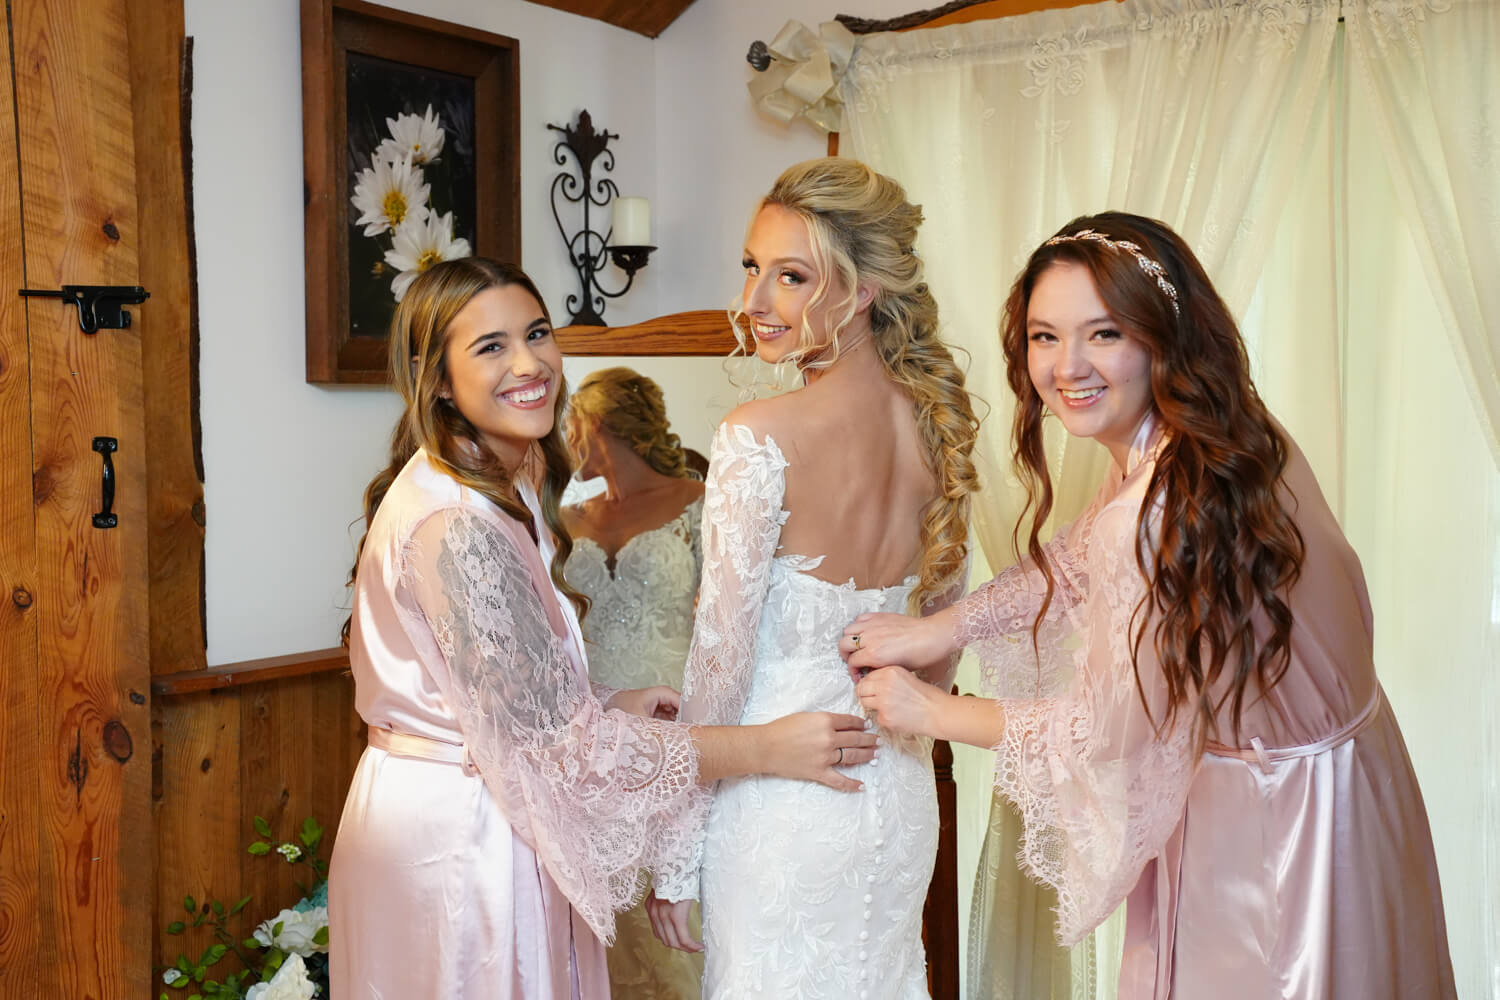 Bridesmaids zipping up a bride's dress in front of a full length mirror